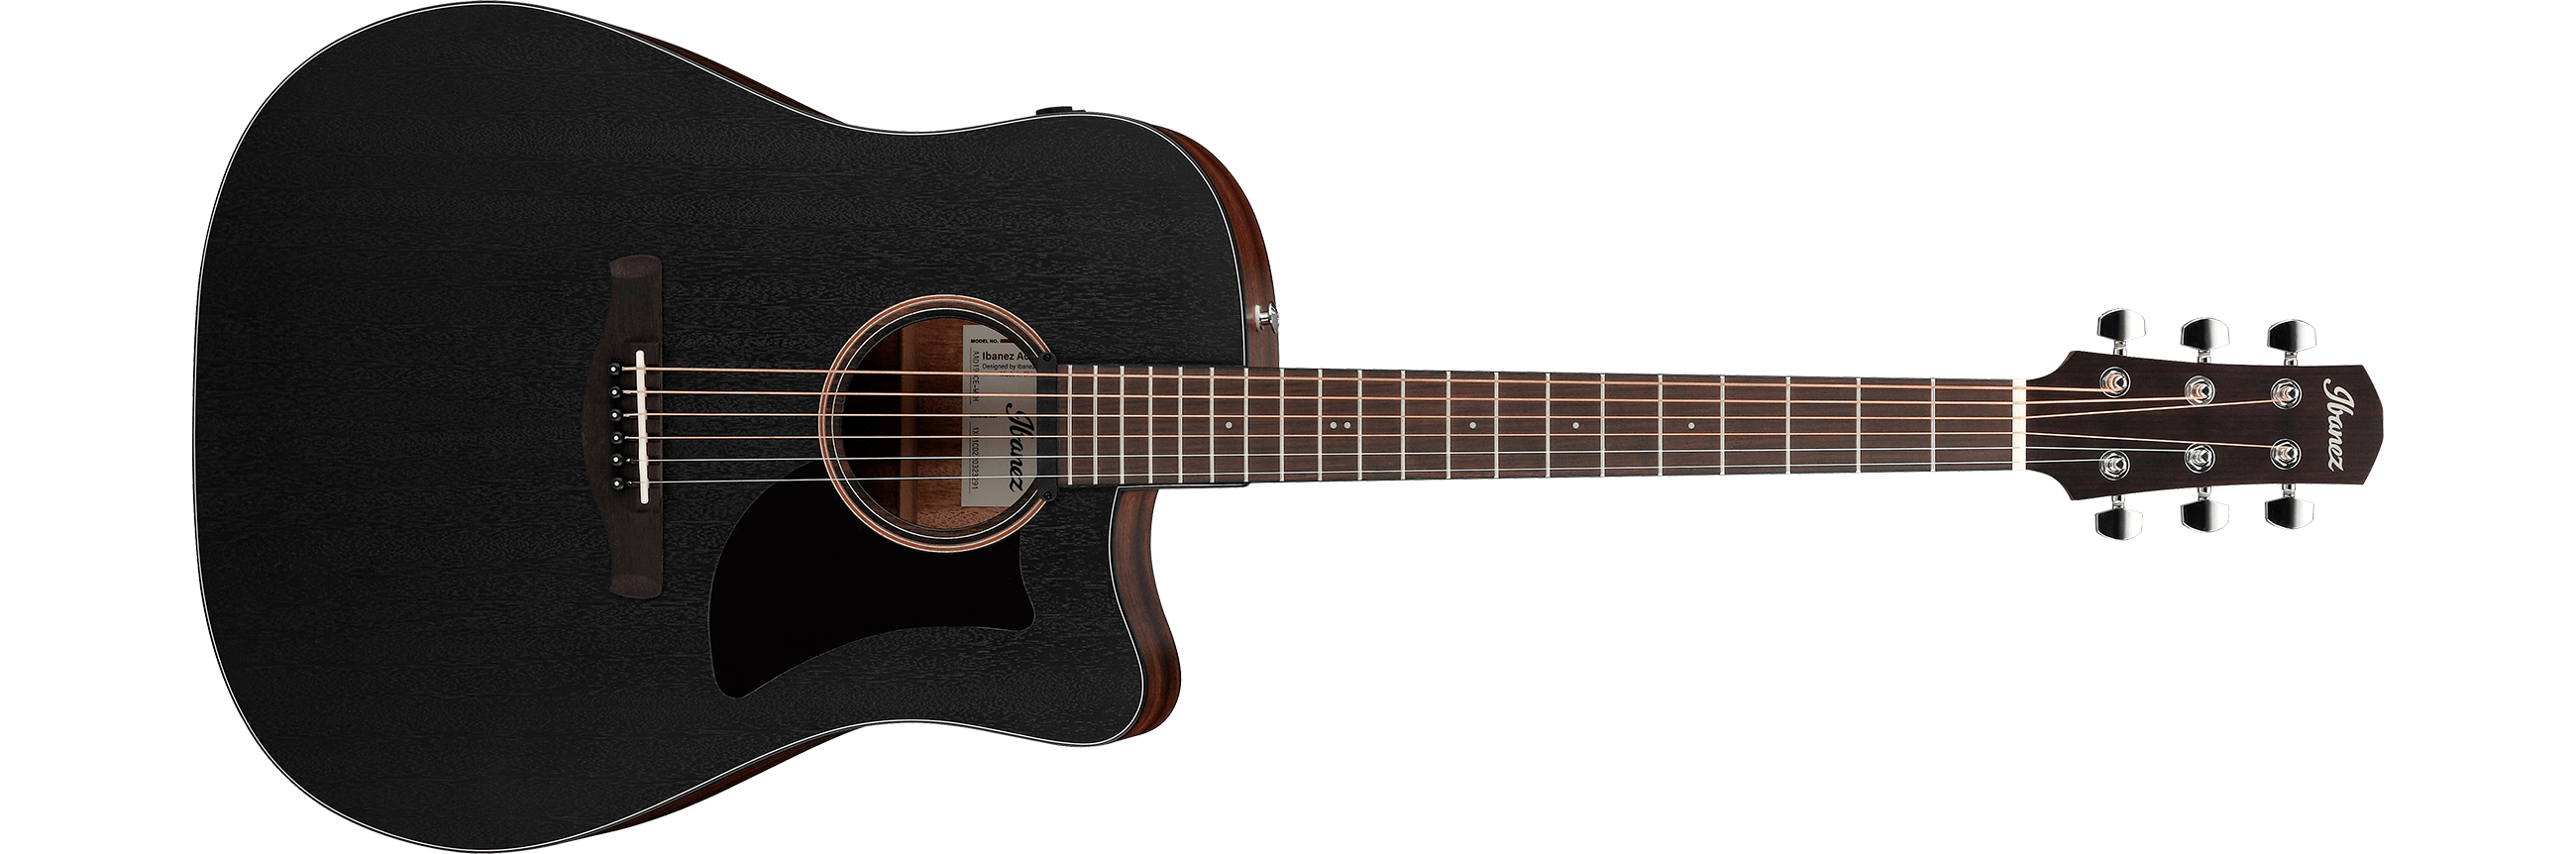 Ibanez AAD190CE Acoustic -  Weathered Black Open Pore Top